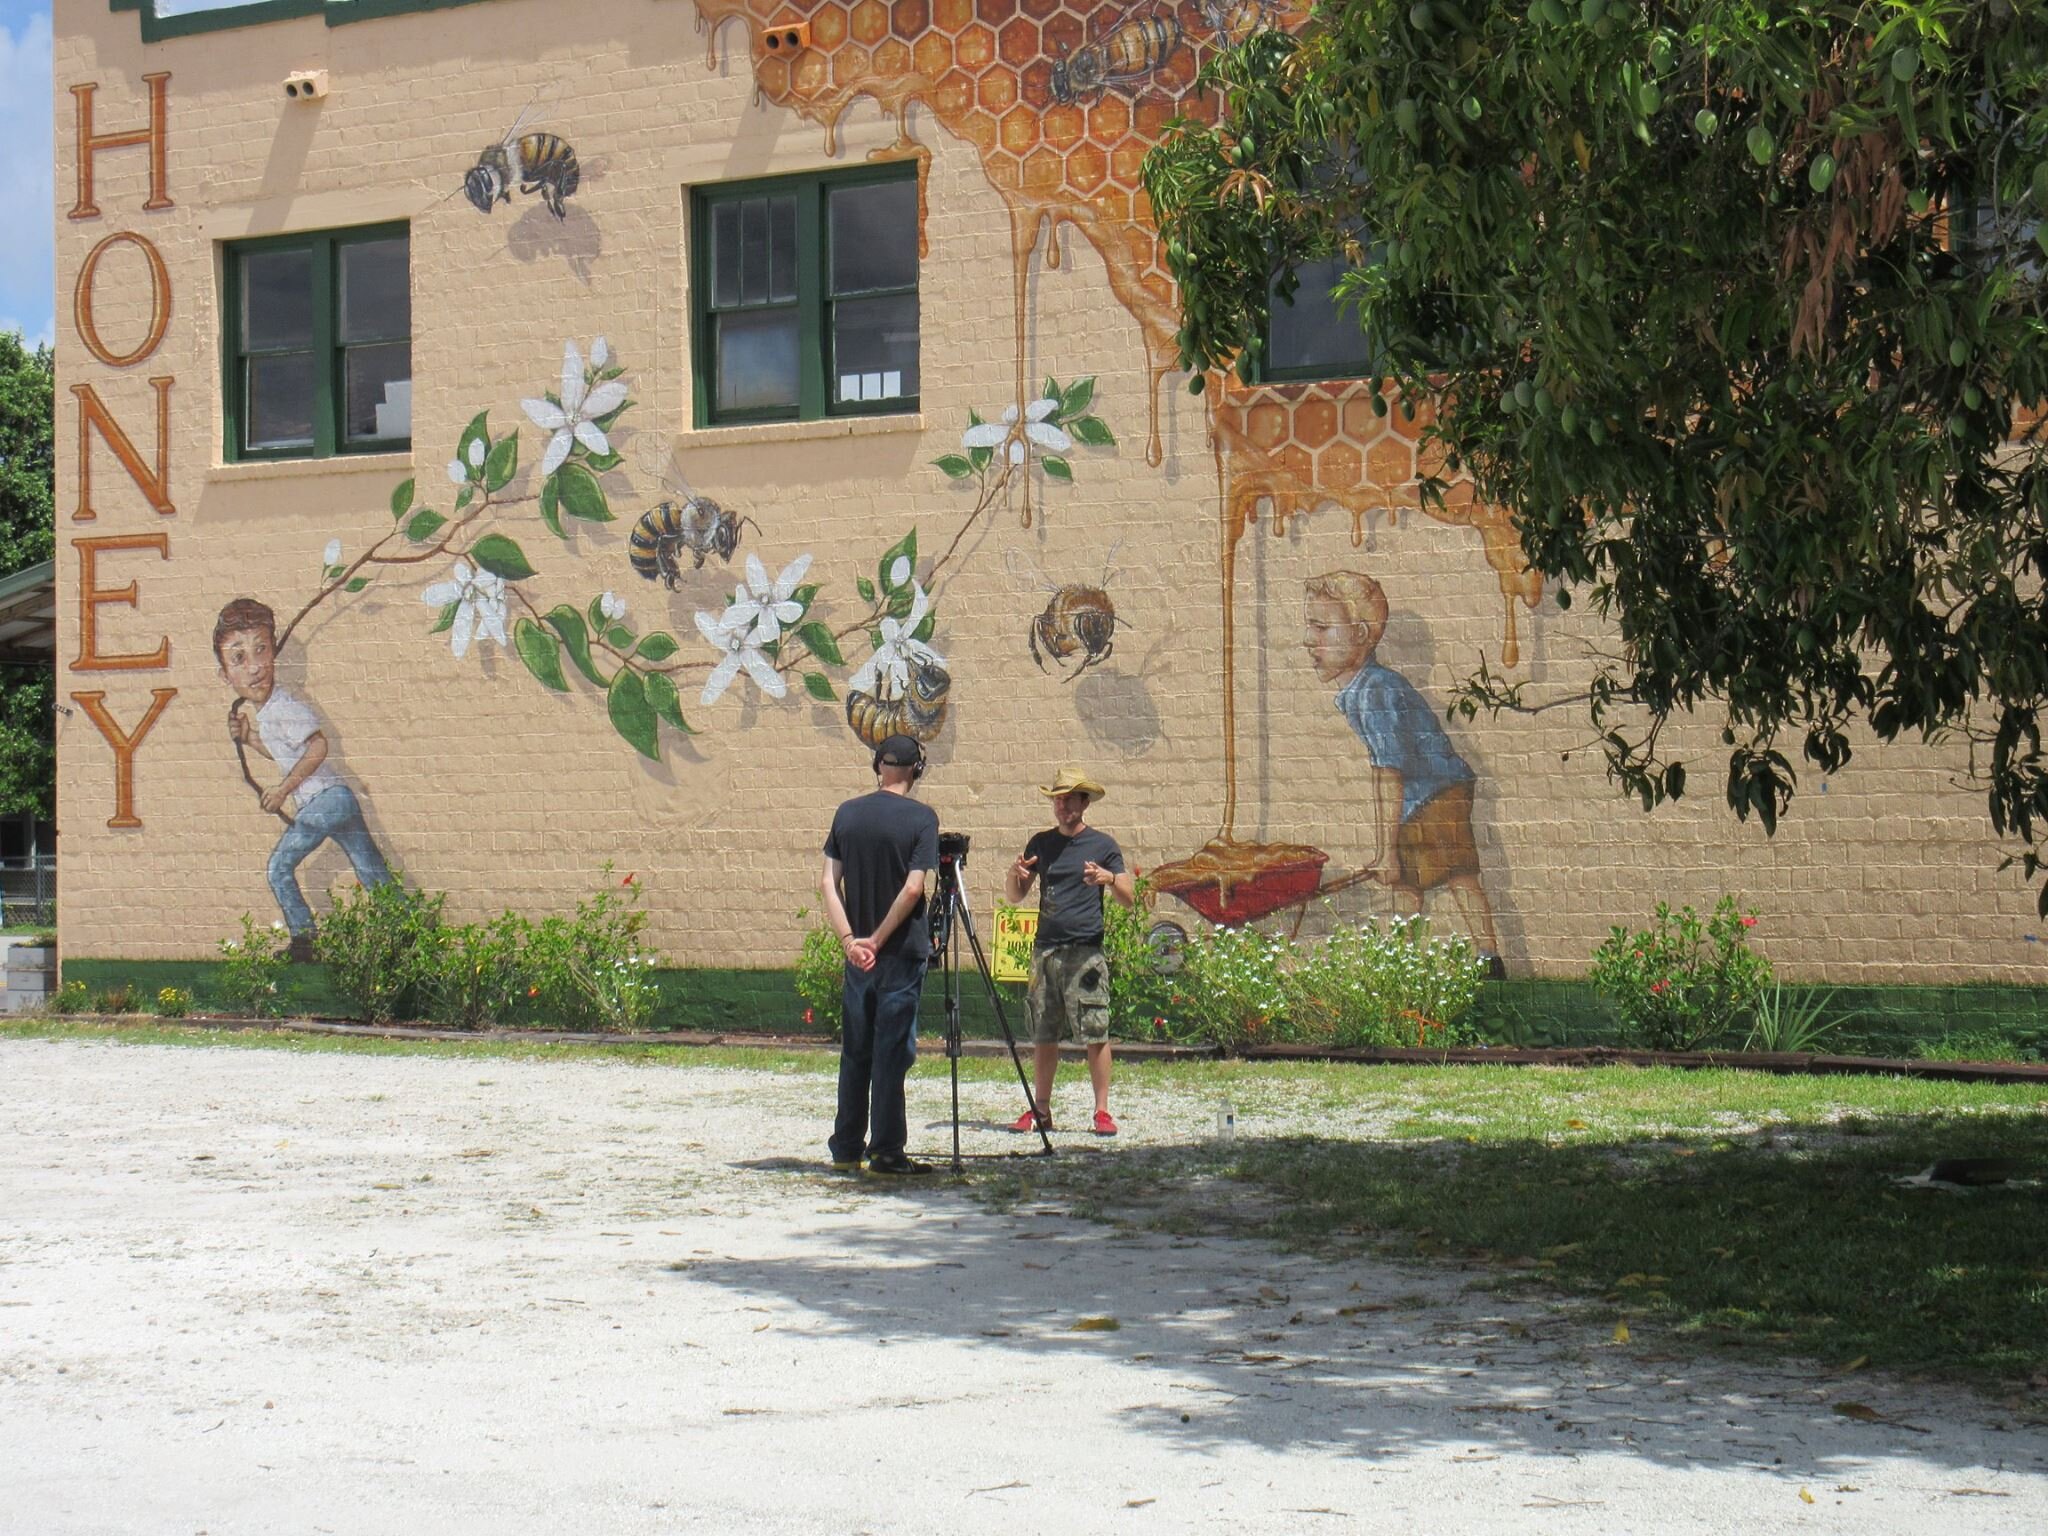 Matt Willey preparing to be photographed in front of the completed mural